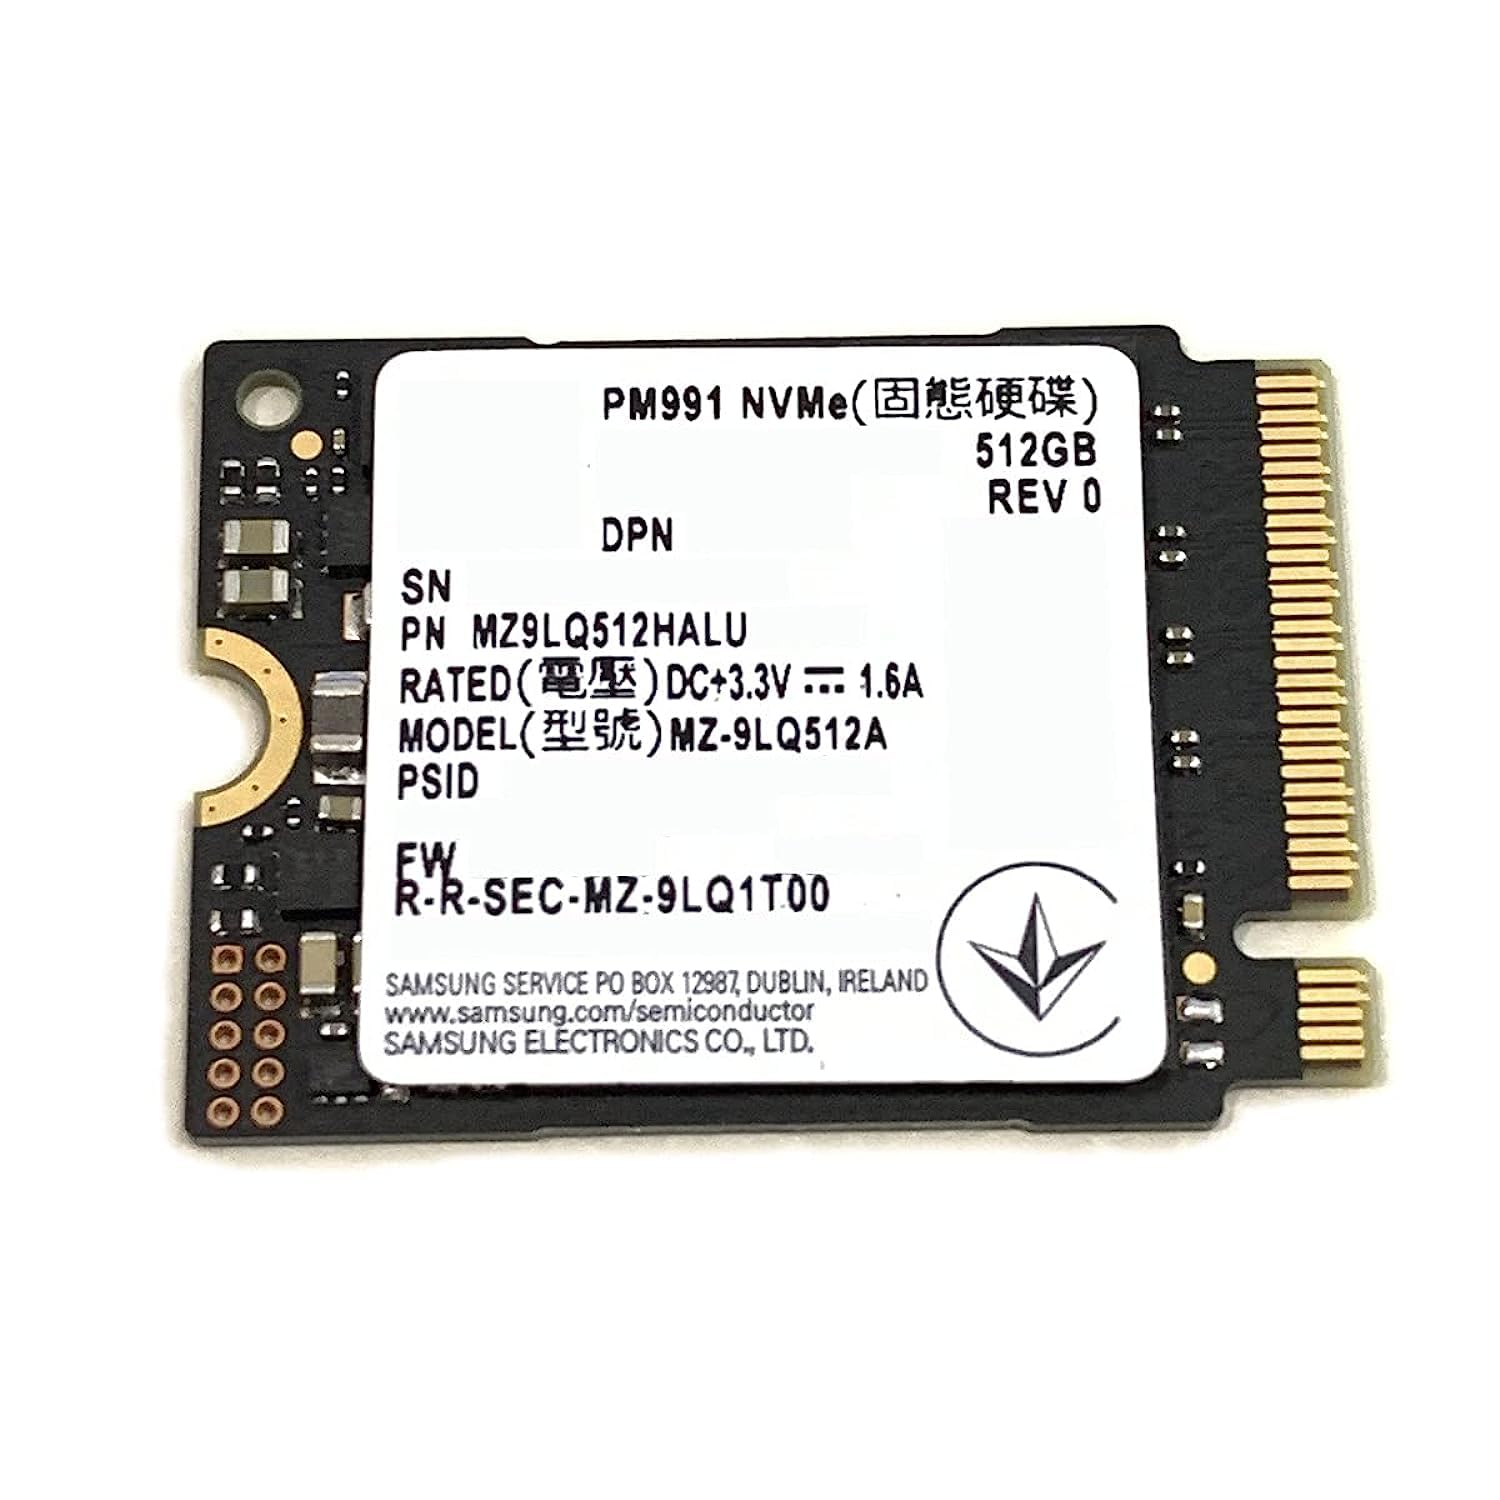 Samsung SSD 512GB PM991 M.2 2230 30mm NVMe PCIe Gen3 x4 MZ9LQ512HALU MZ-9LQ512A Solid State Drive Compatible with Dell HP Len